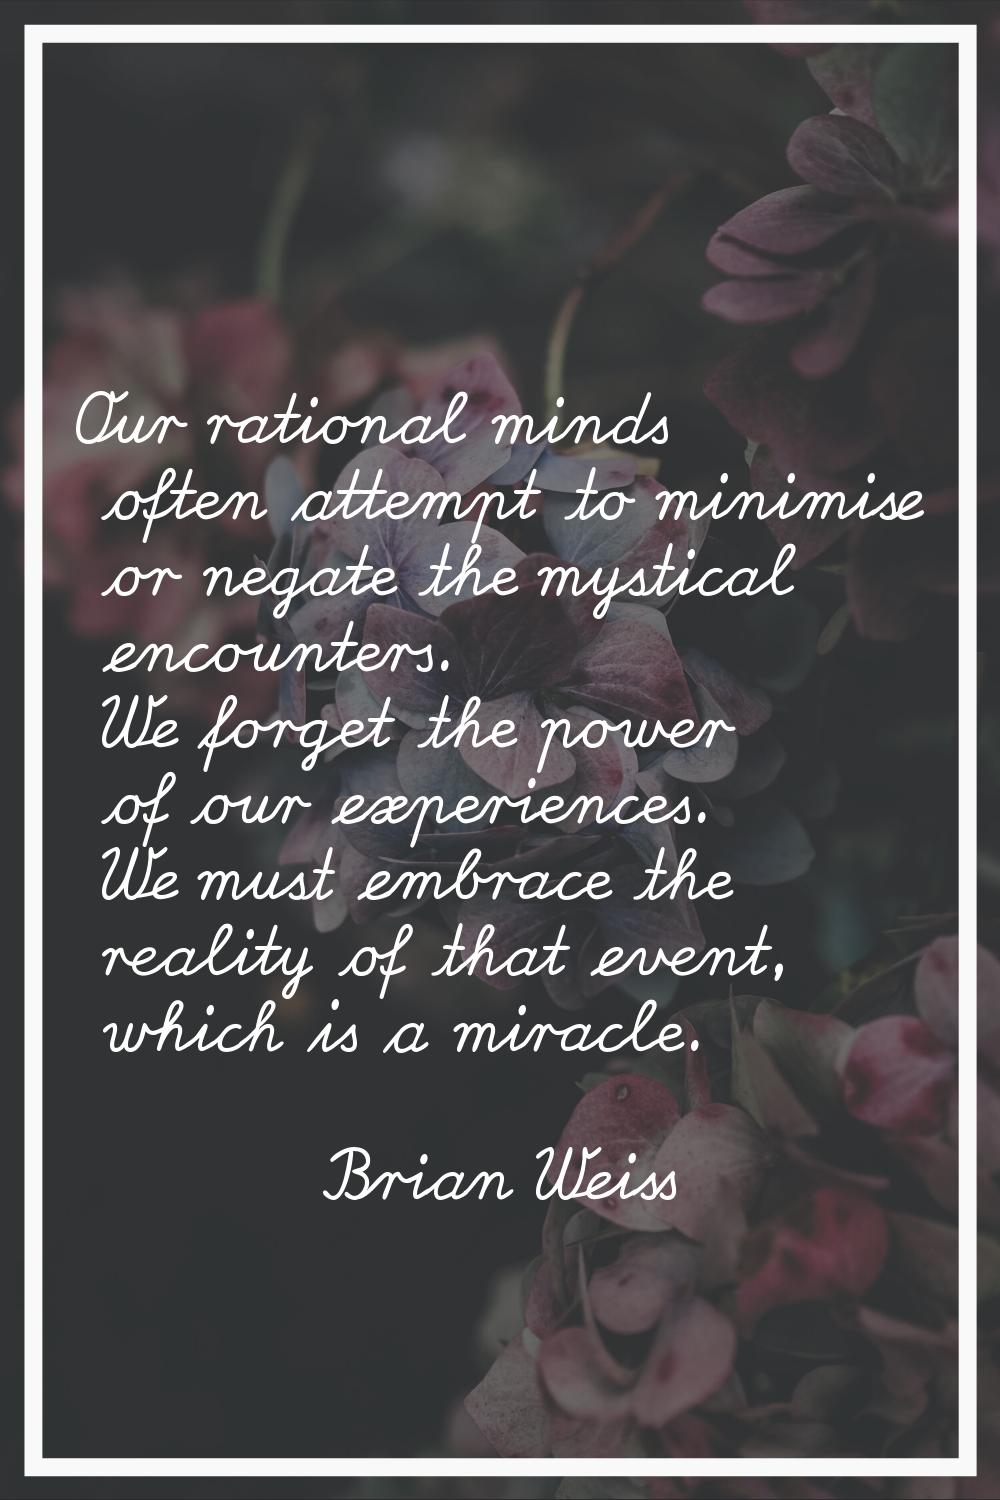 Our rational minds often attempt to minimise or negate the mystical encounters. We forget the power